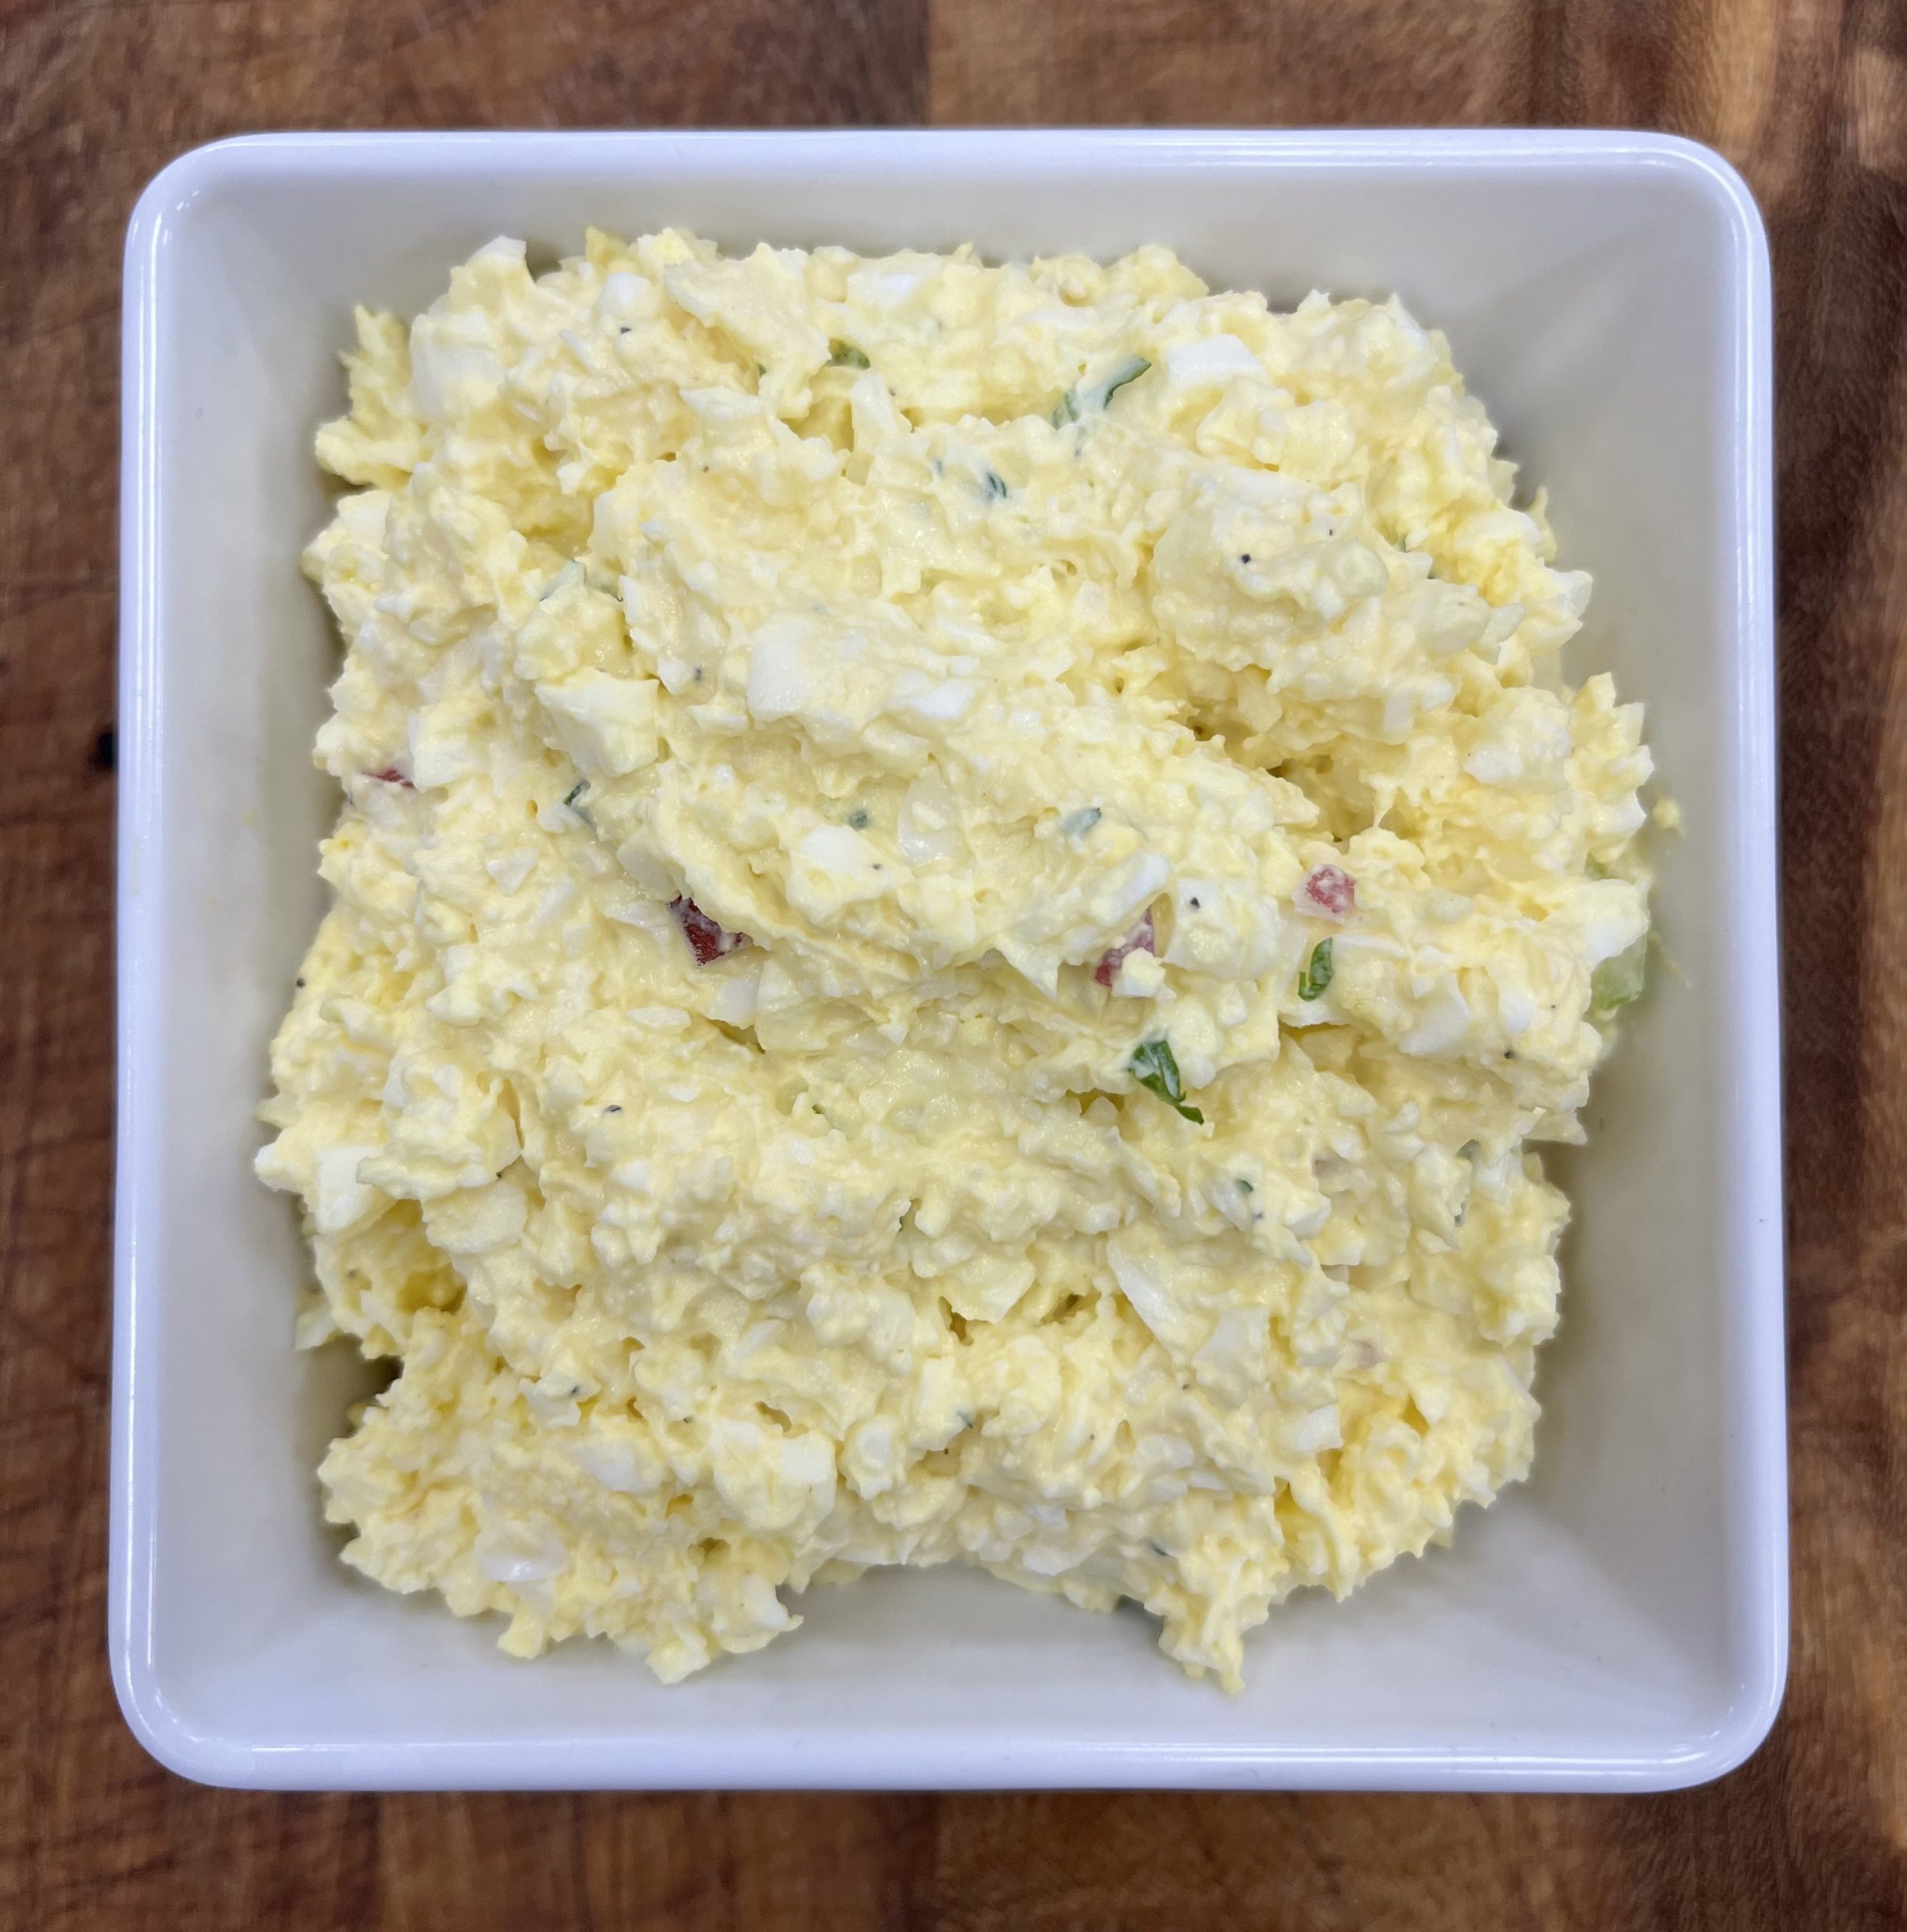 APM egg salad, made our professional chefs